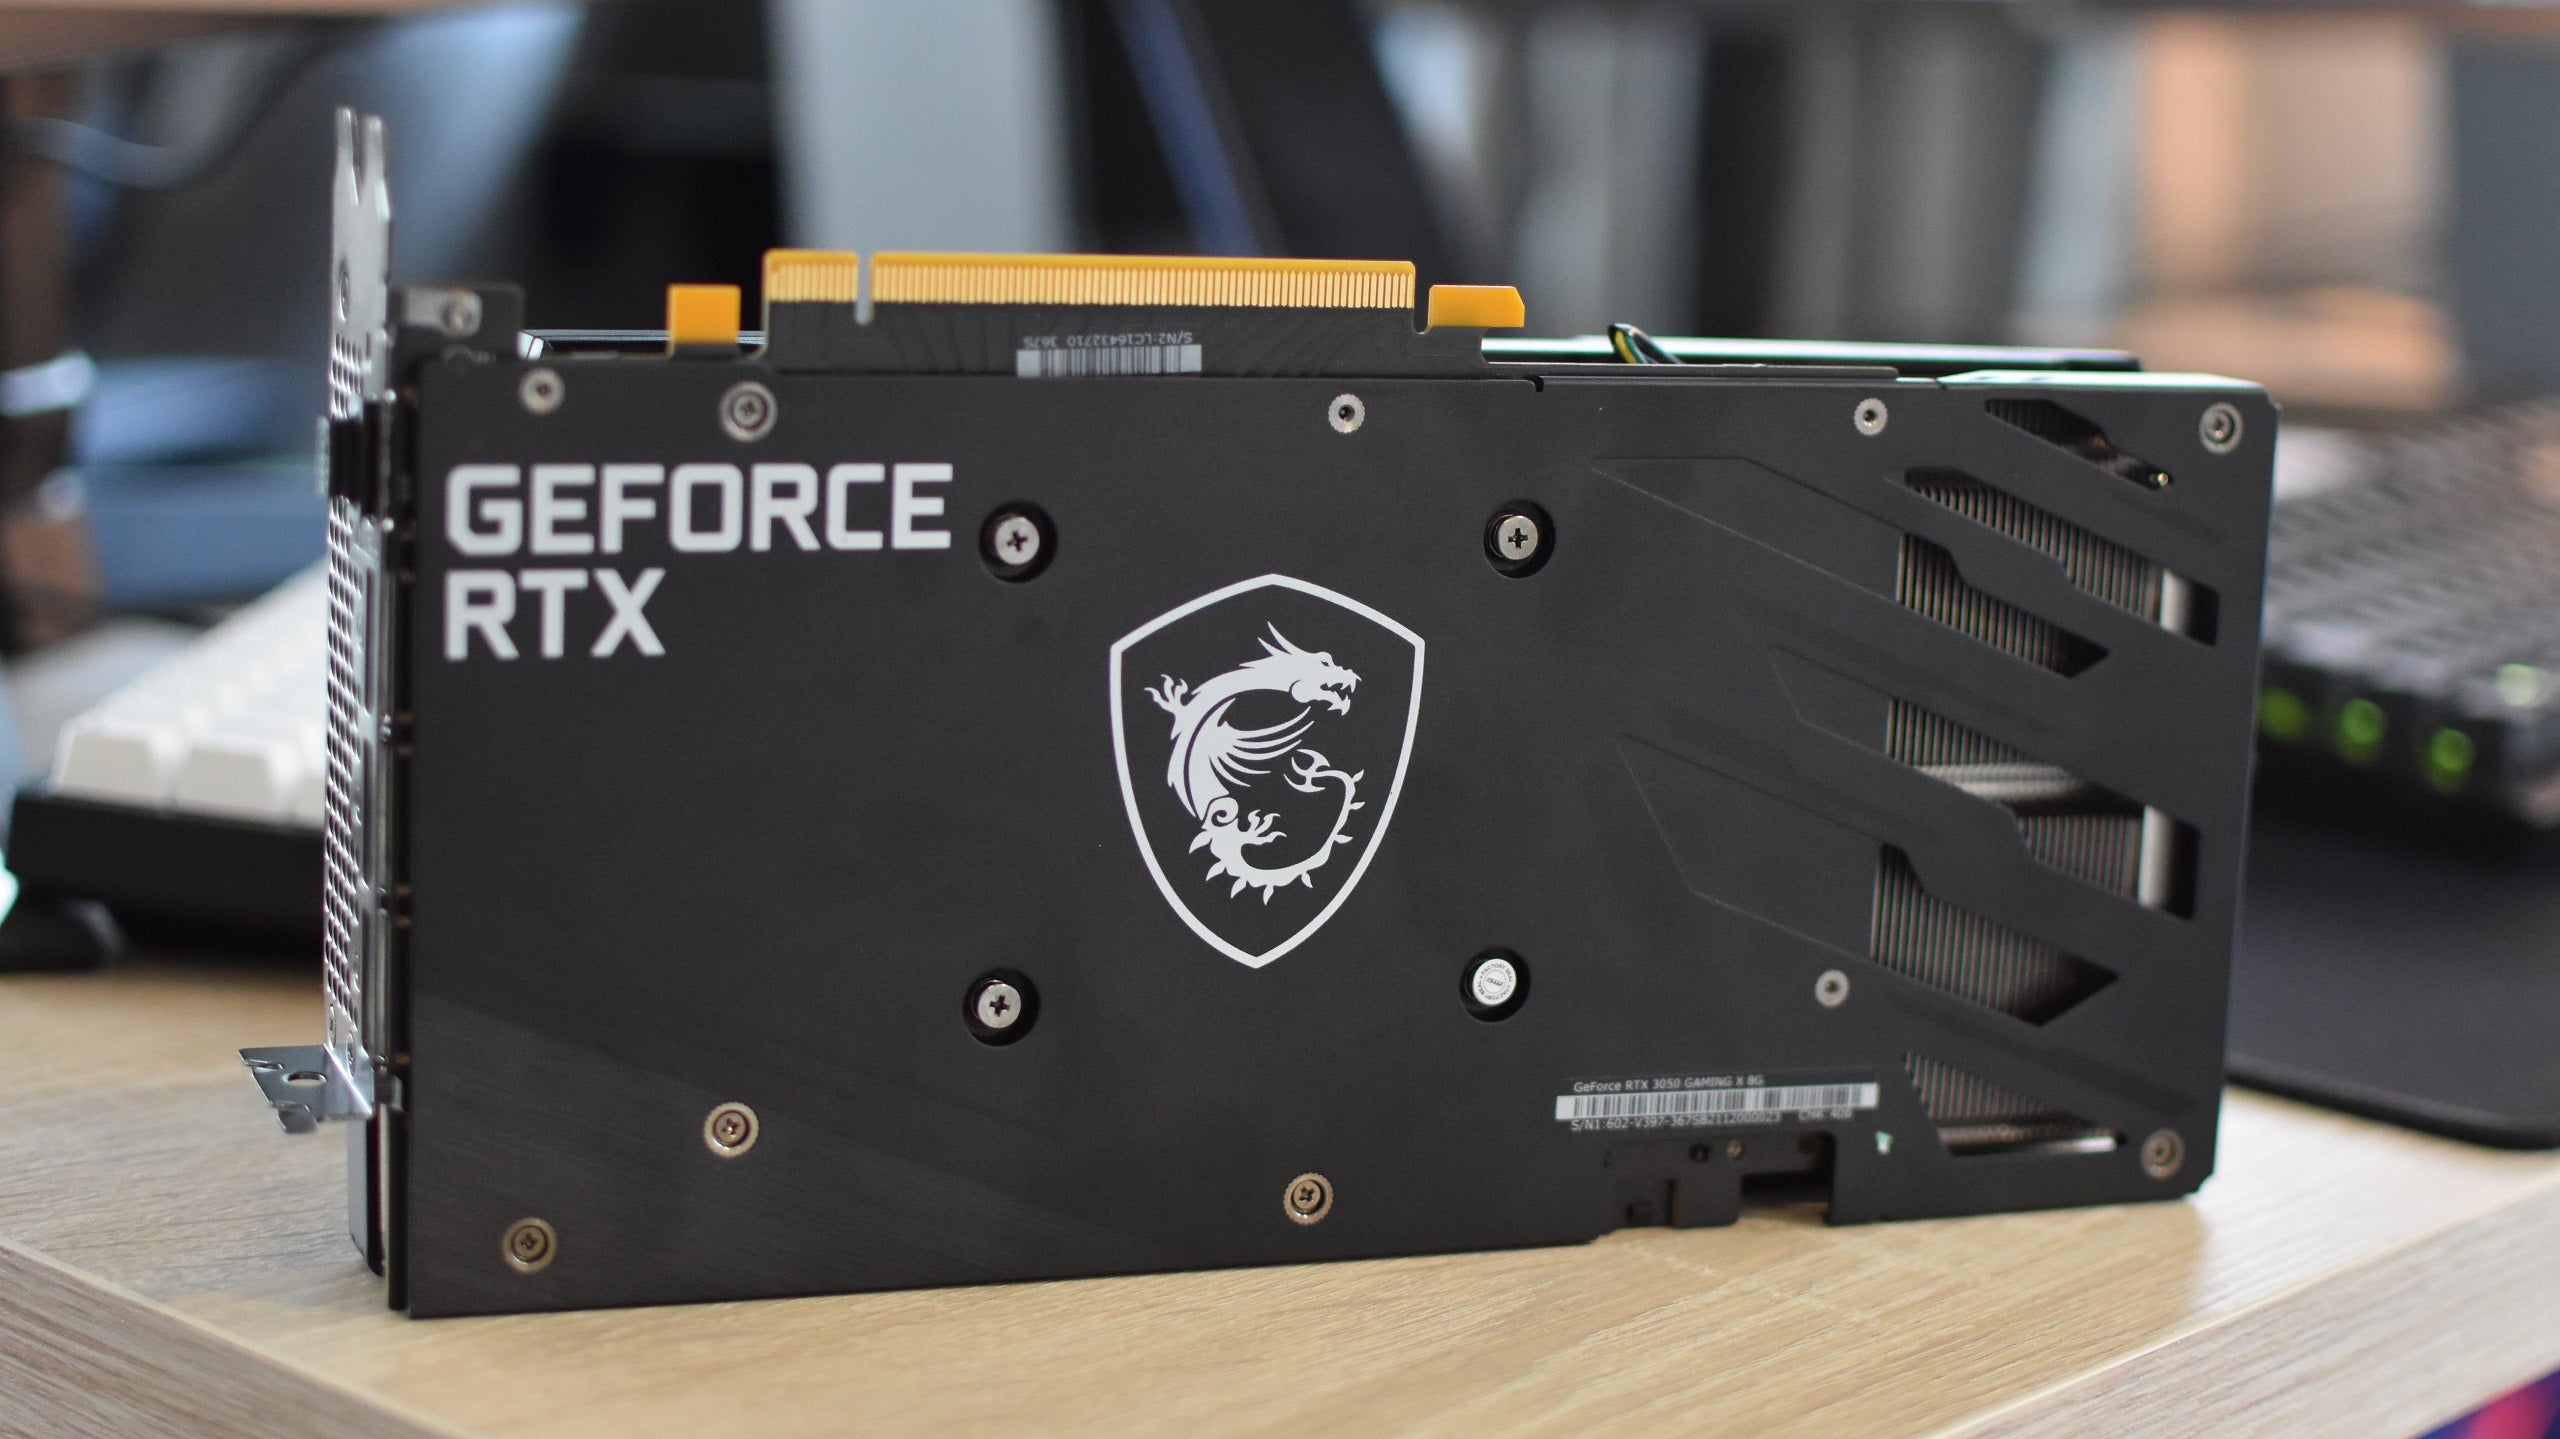 The MSI GeForce RTX 3050 Gaming X 8G on a desk, showing its reinforced backplate.